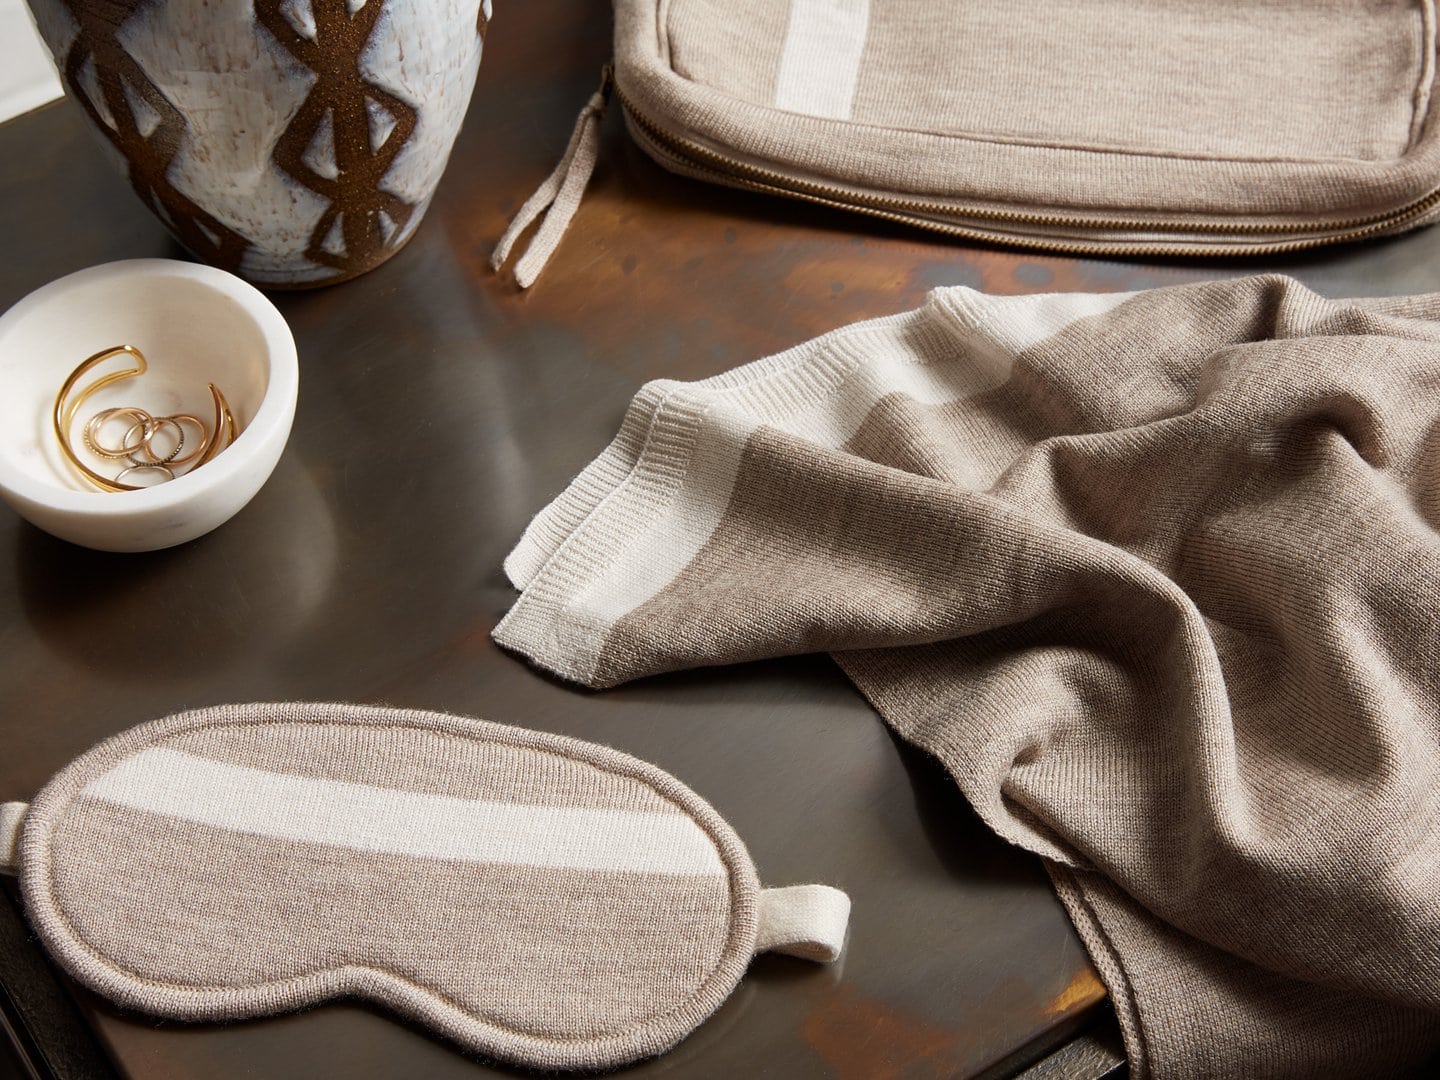 grey and white knit travel blanket and eye mask set on a table next to a white bowl holding gold jewelry